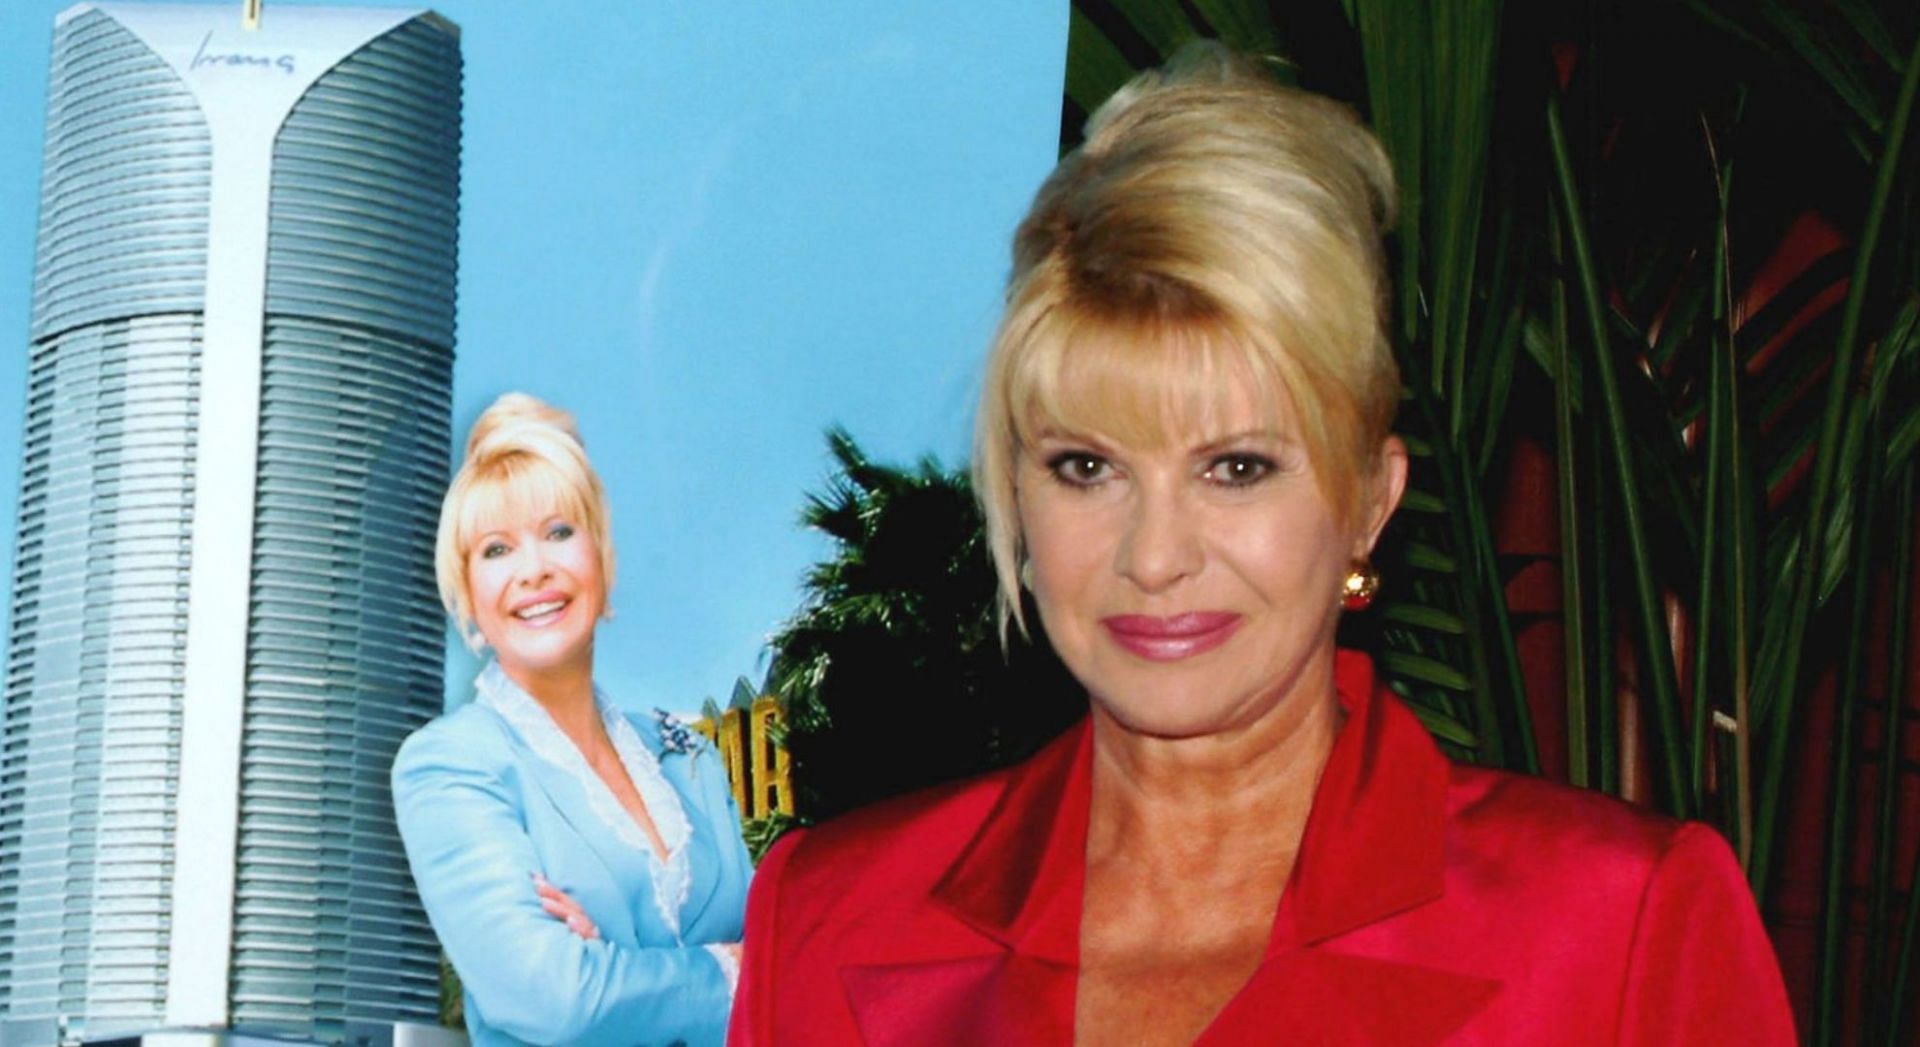 Ivana Trump passed away on July 14 at the age of 73 (Image via Getty Images)